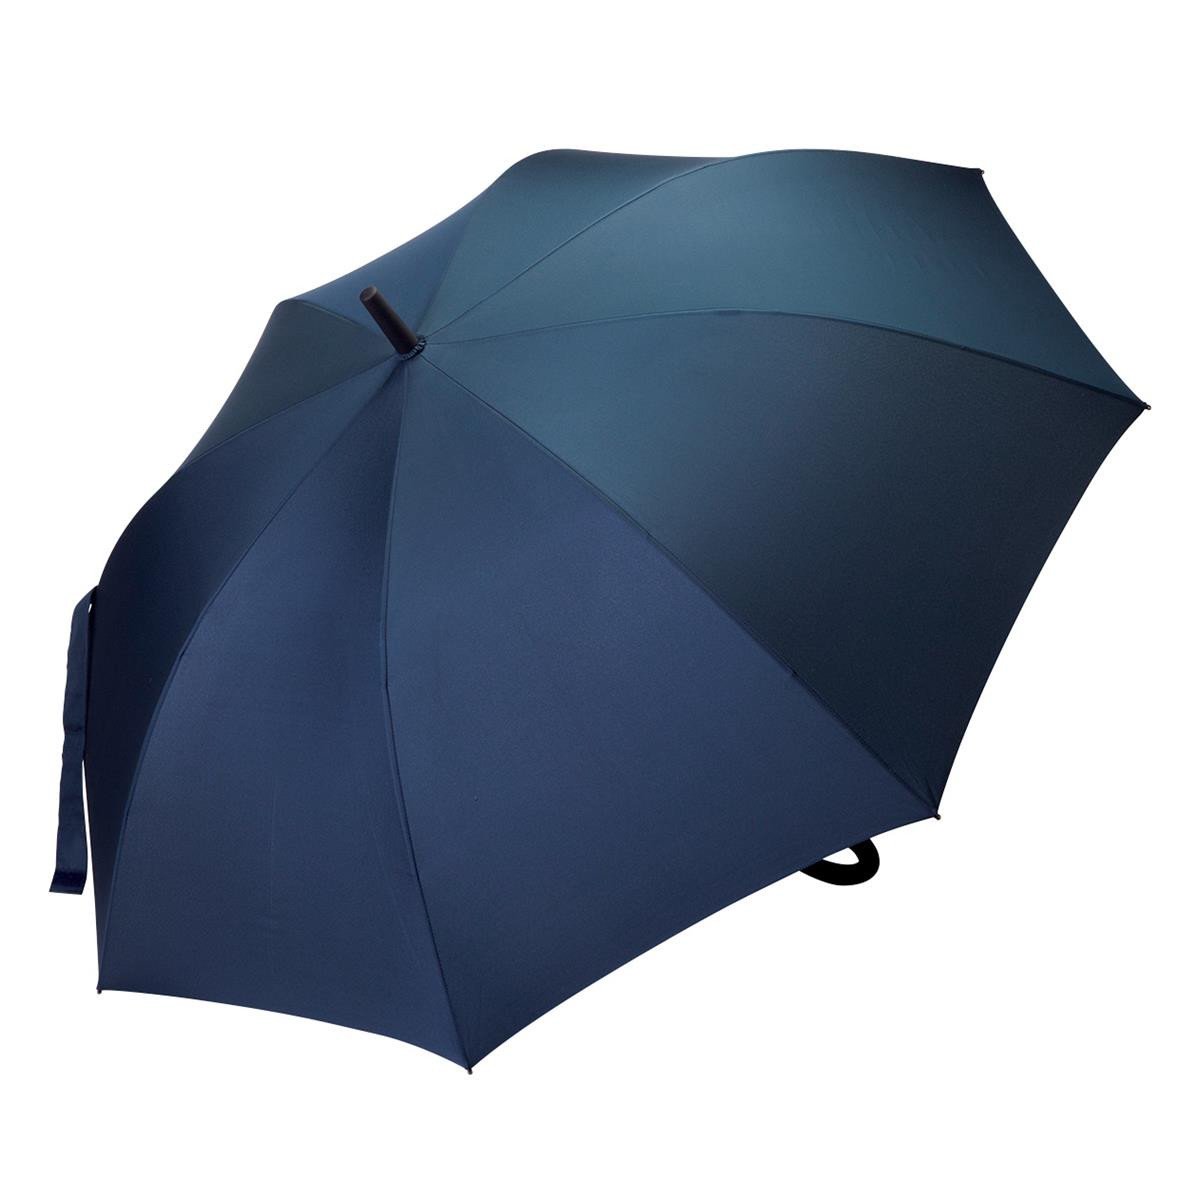 UMBRA®️ Corporate Hook Umbrella With Wind Resistant Frame, Fibreglass Shaft With Auto-Open Push Button Feature - Premium Rubberised Hook Handle